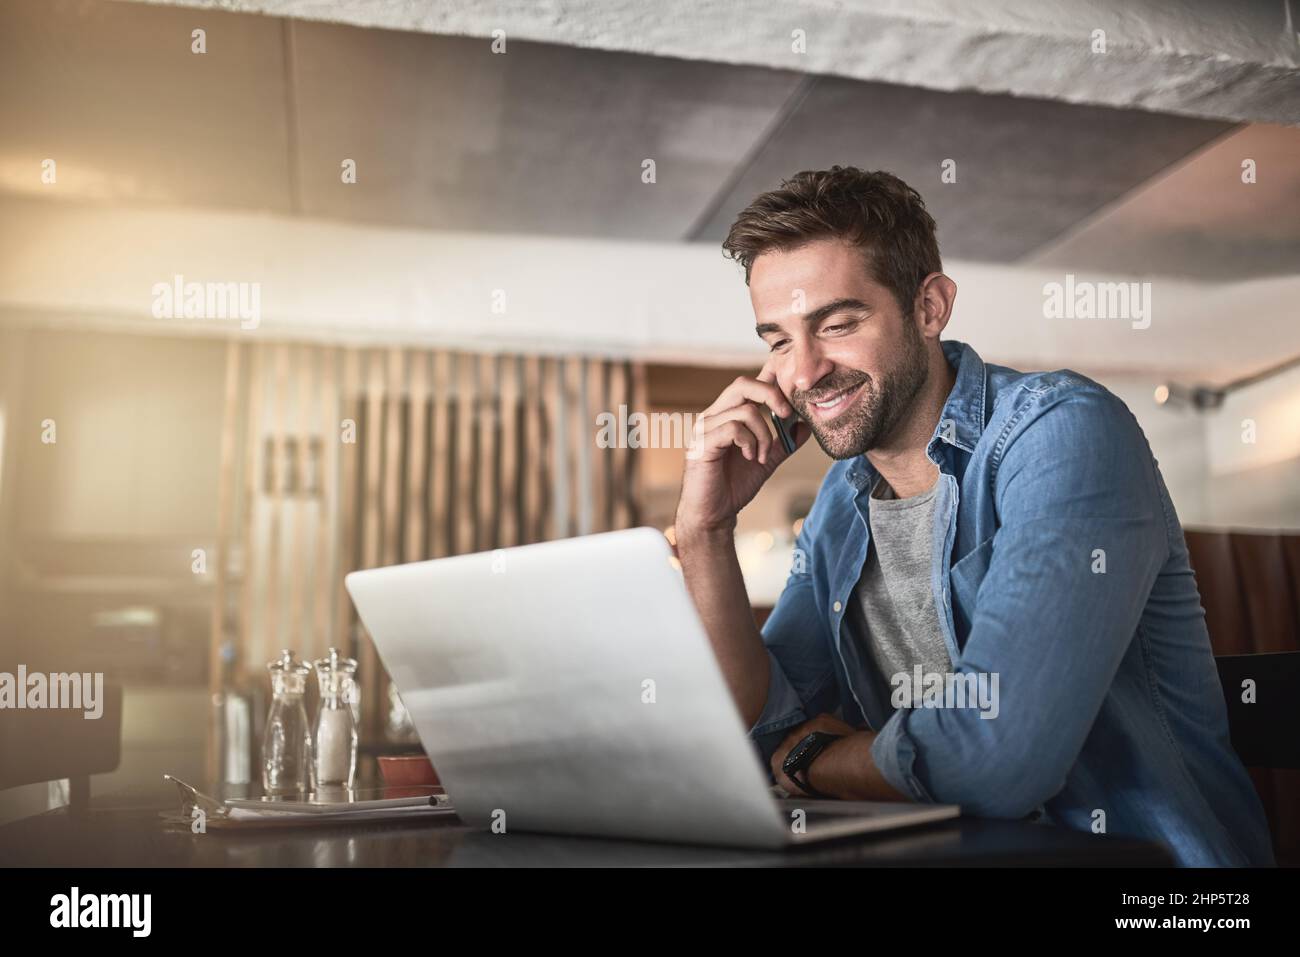 The perfect place for some productivity. Shot of a handsome young man using a laptop and phone in a coffee shop. Stock Photo